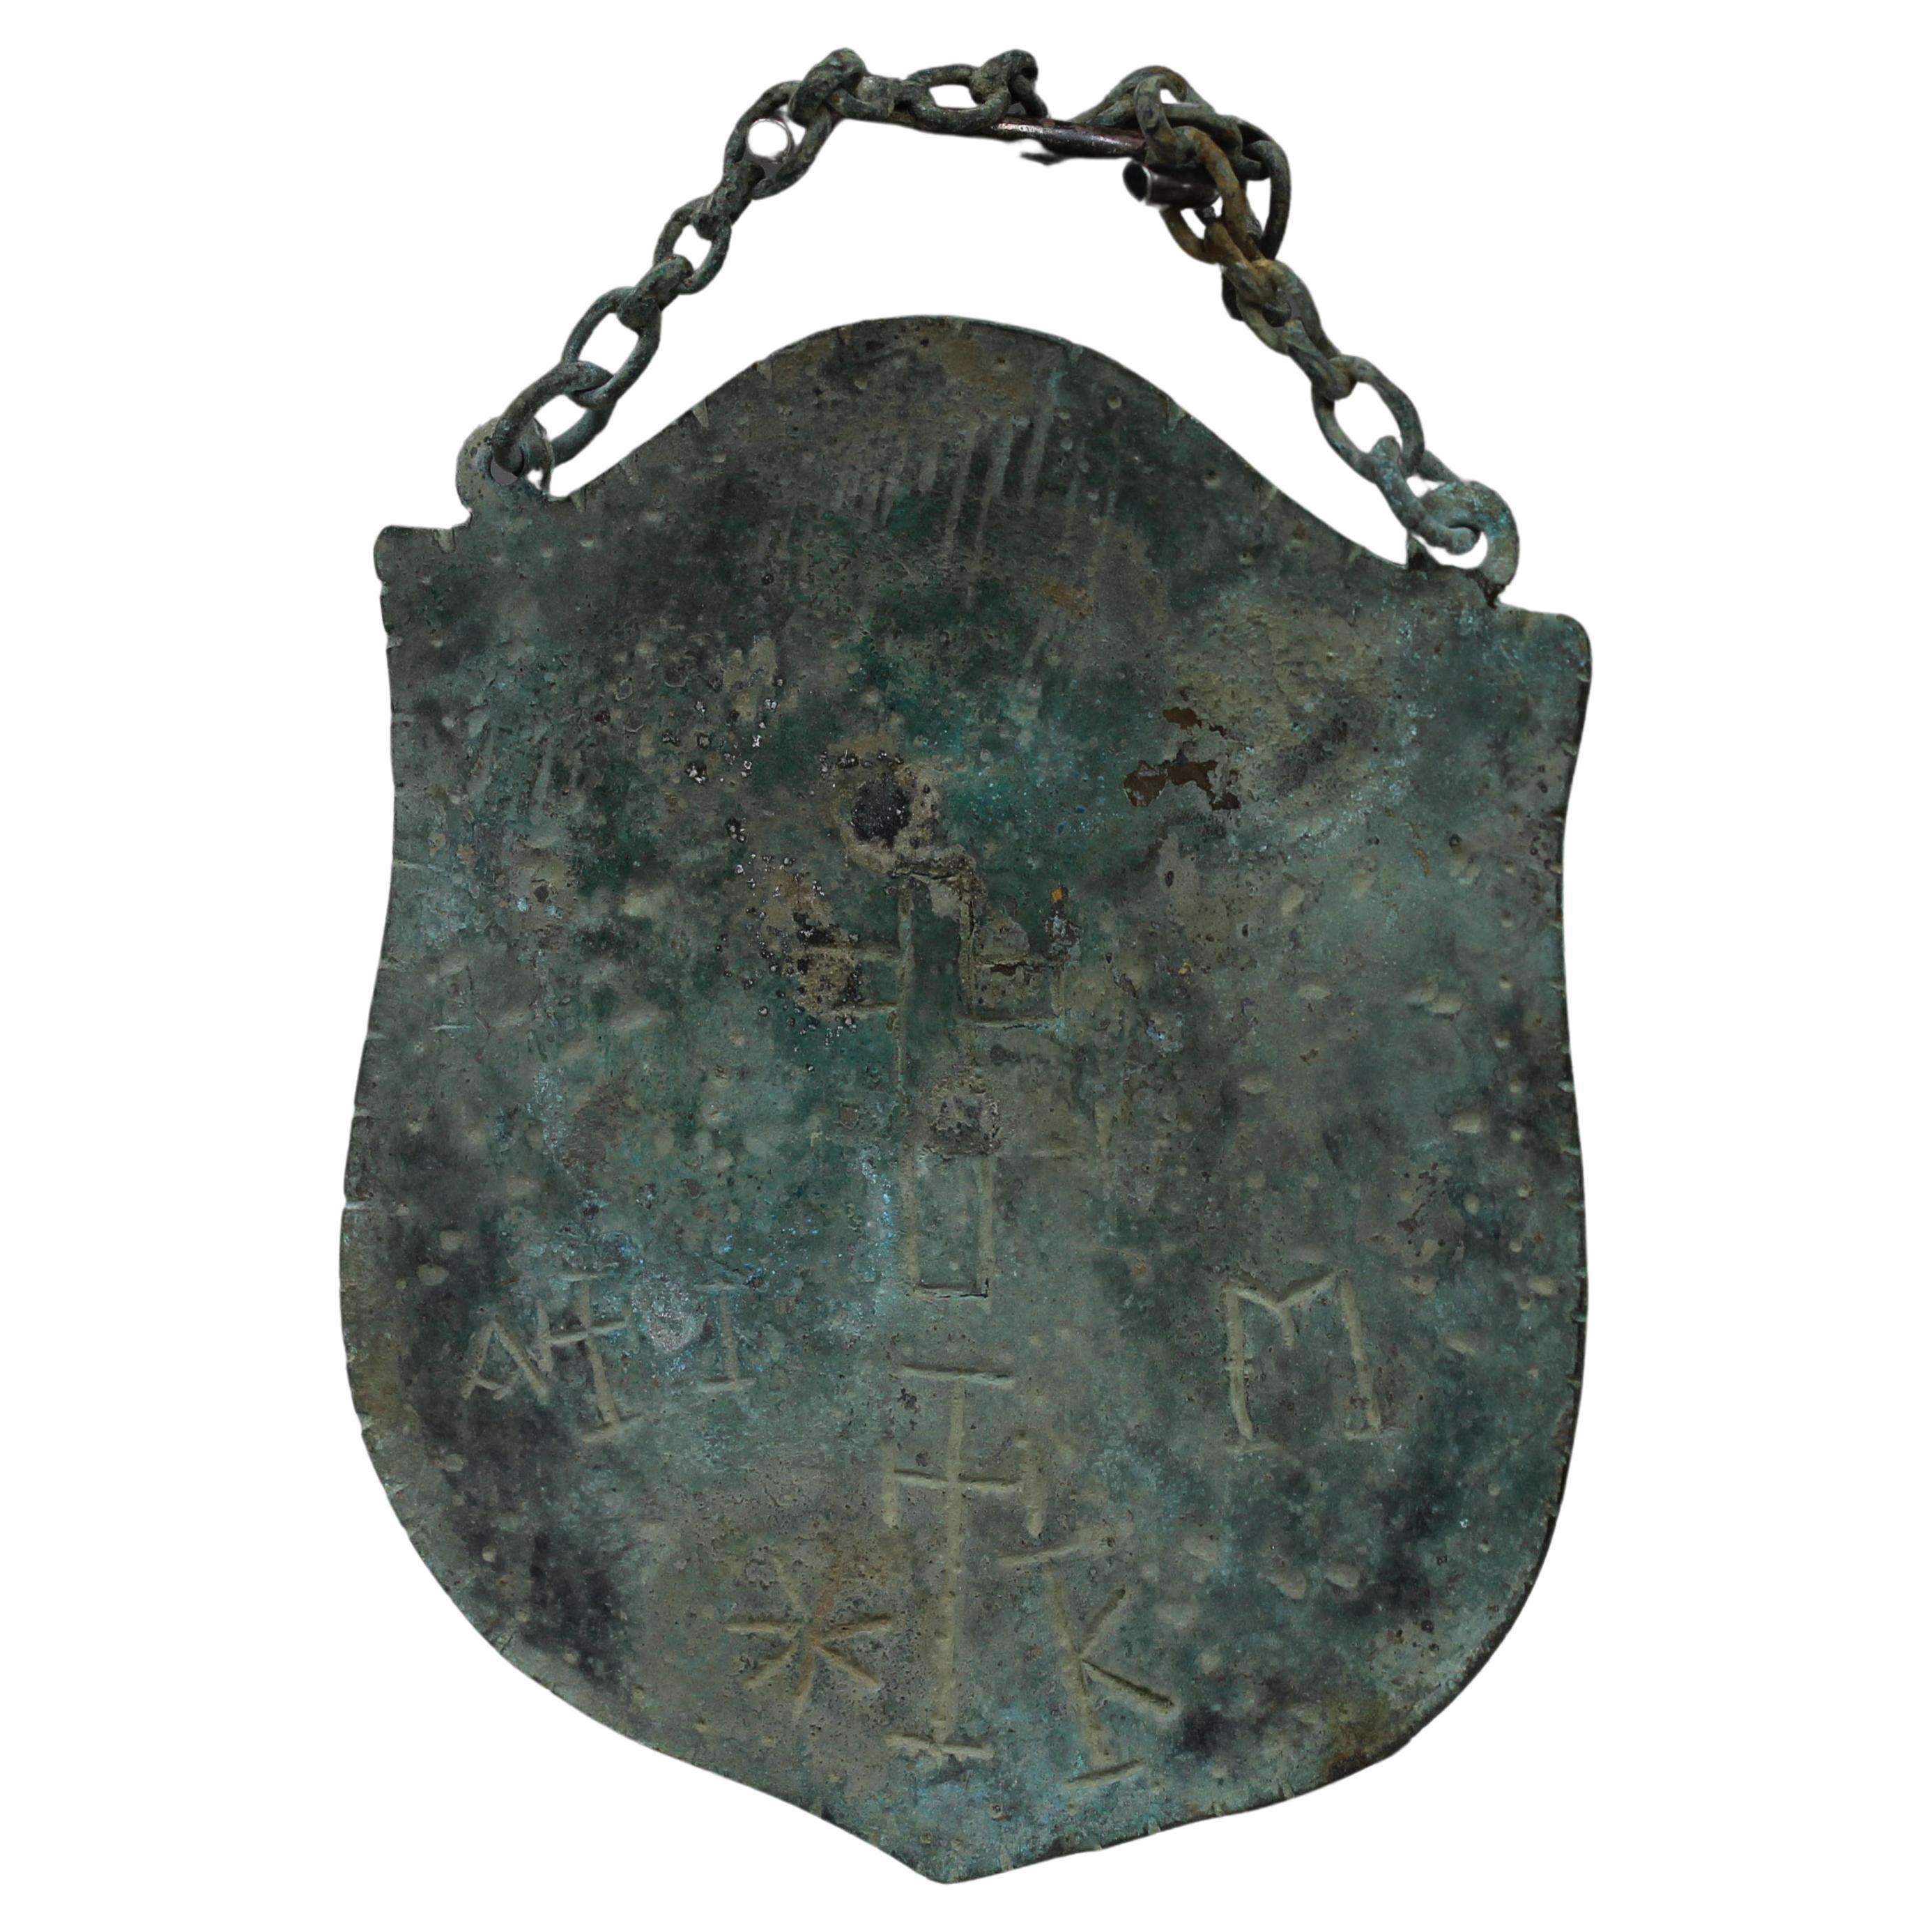 Byzantine pilgrims badge / plaque with incised cross and inscription